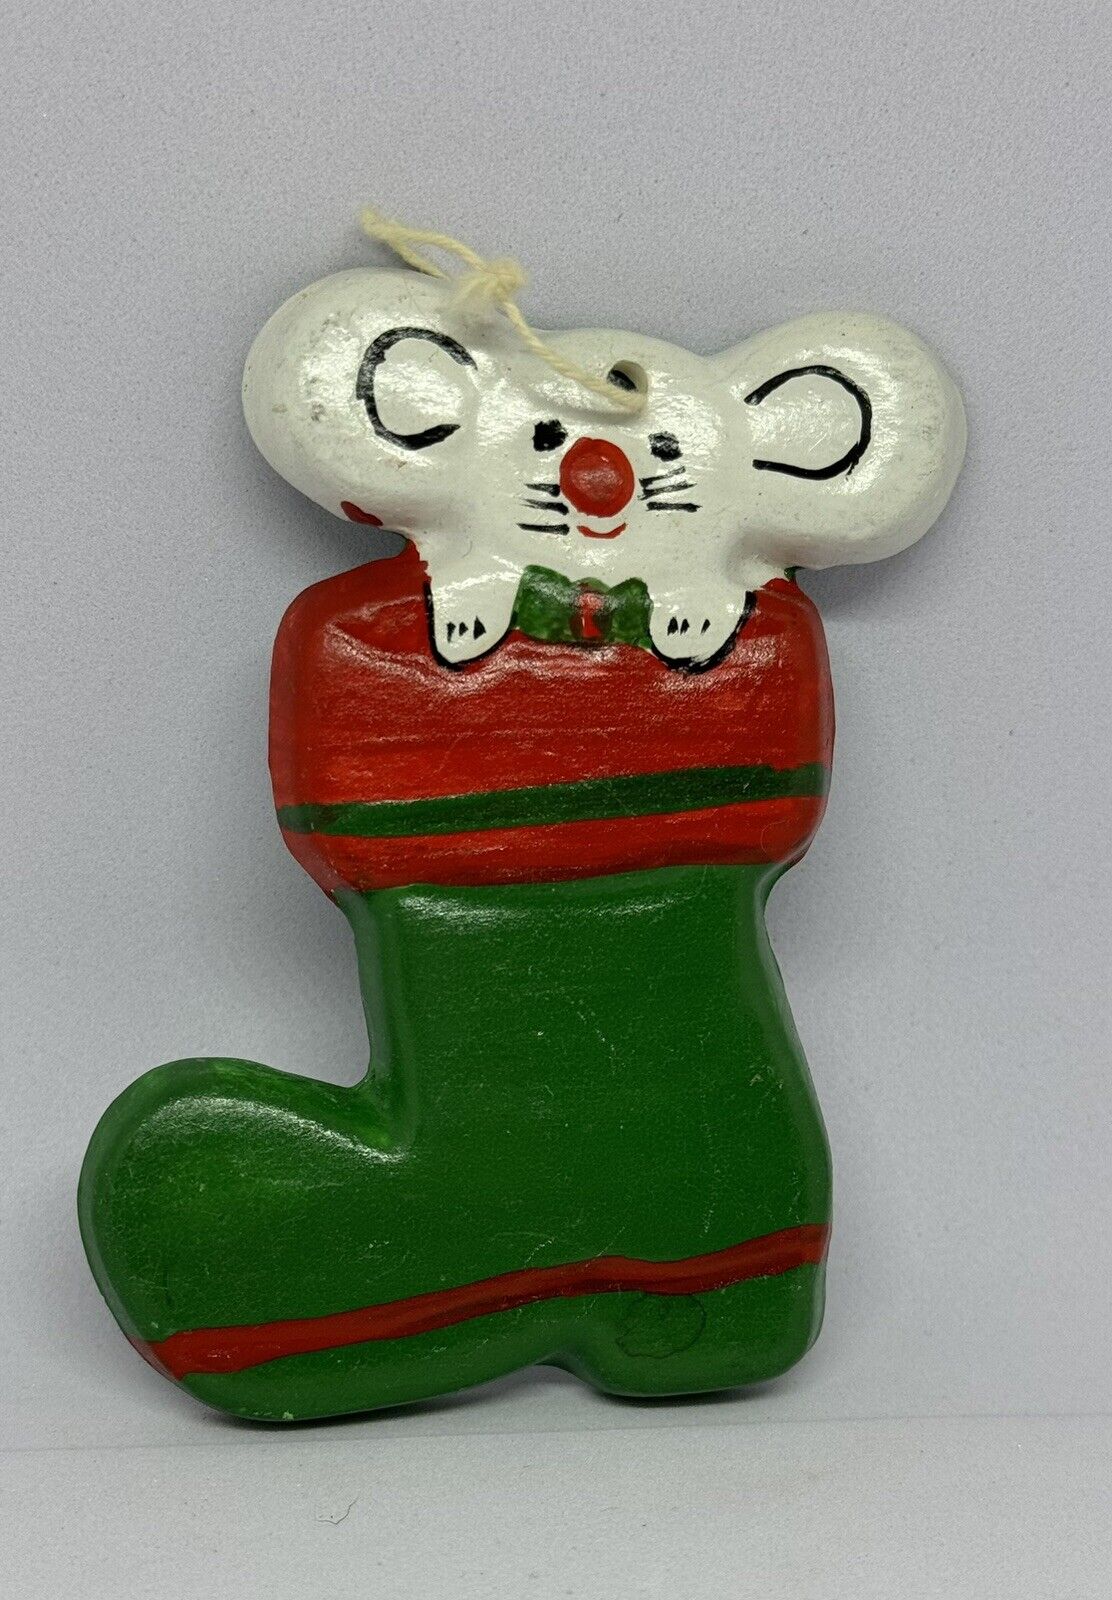 Vintage 1974 Hand Painted Ceramic Christmas Mouse In stocking Ornament